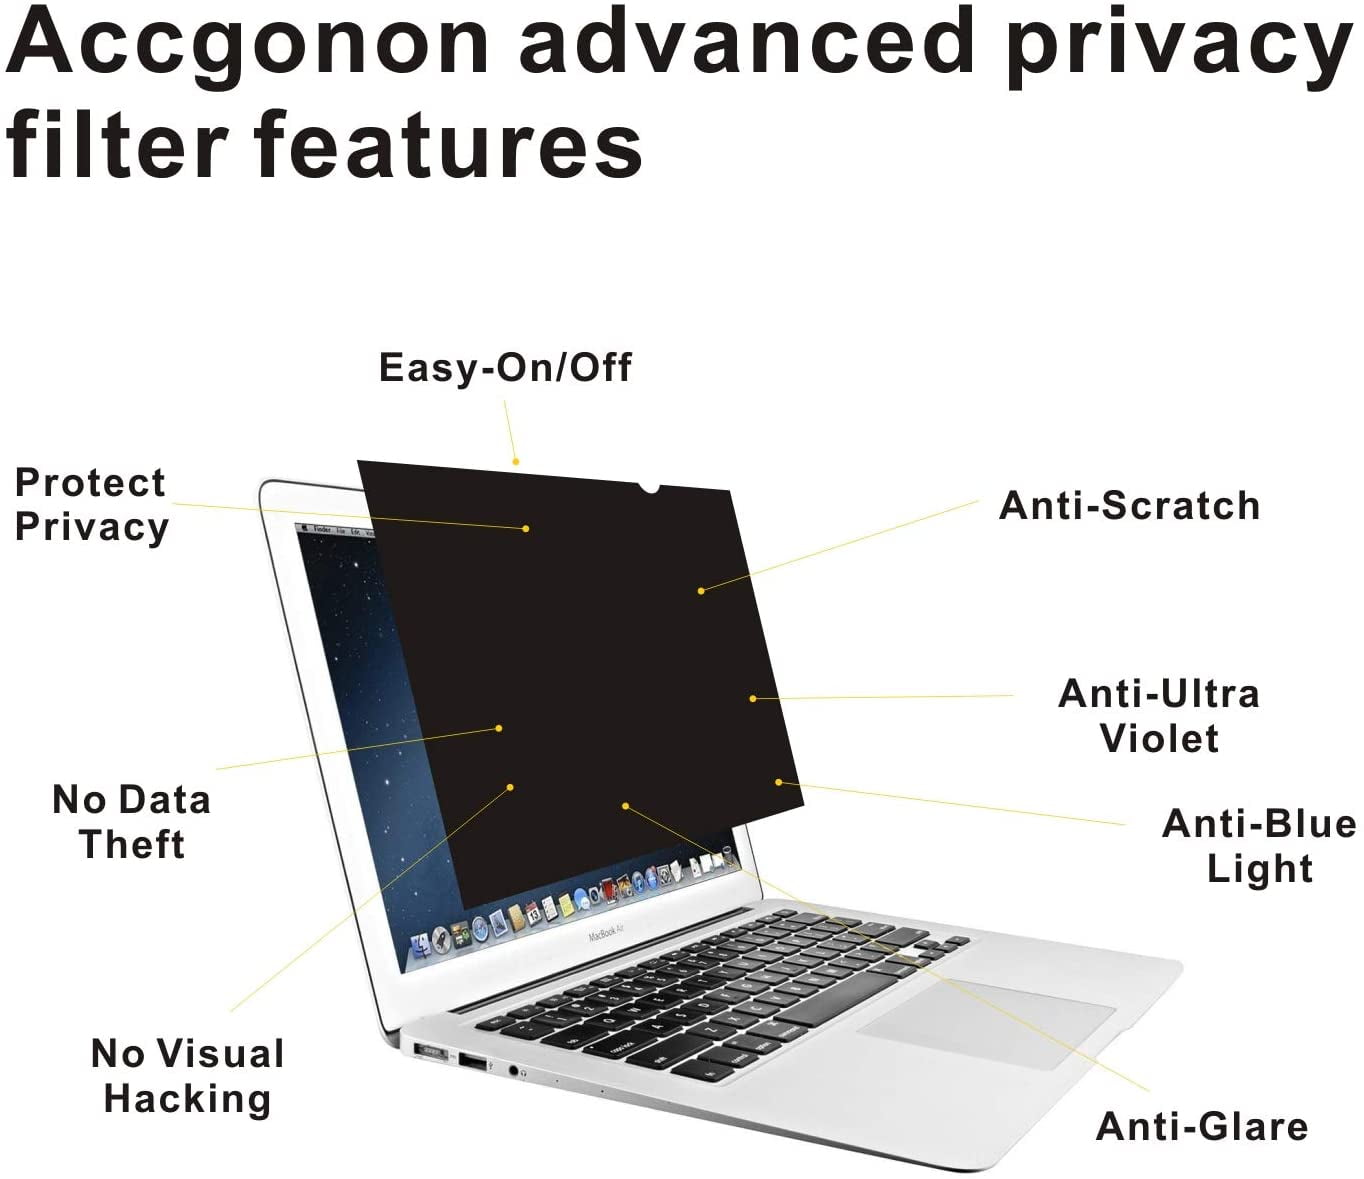 Monitors Privacy Screen Protector,Anti-Glare Anti-Spy Anti-Blue Scratch and UV Protection,Easy Install Accgonon Computer Privacy Screen Filters,19.5-Inch Widescreen 16:9 